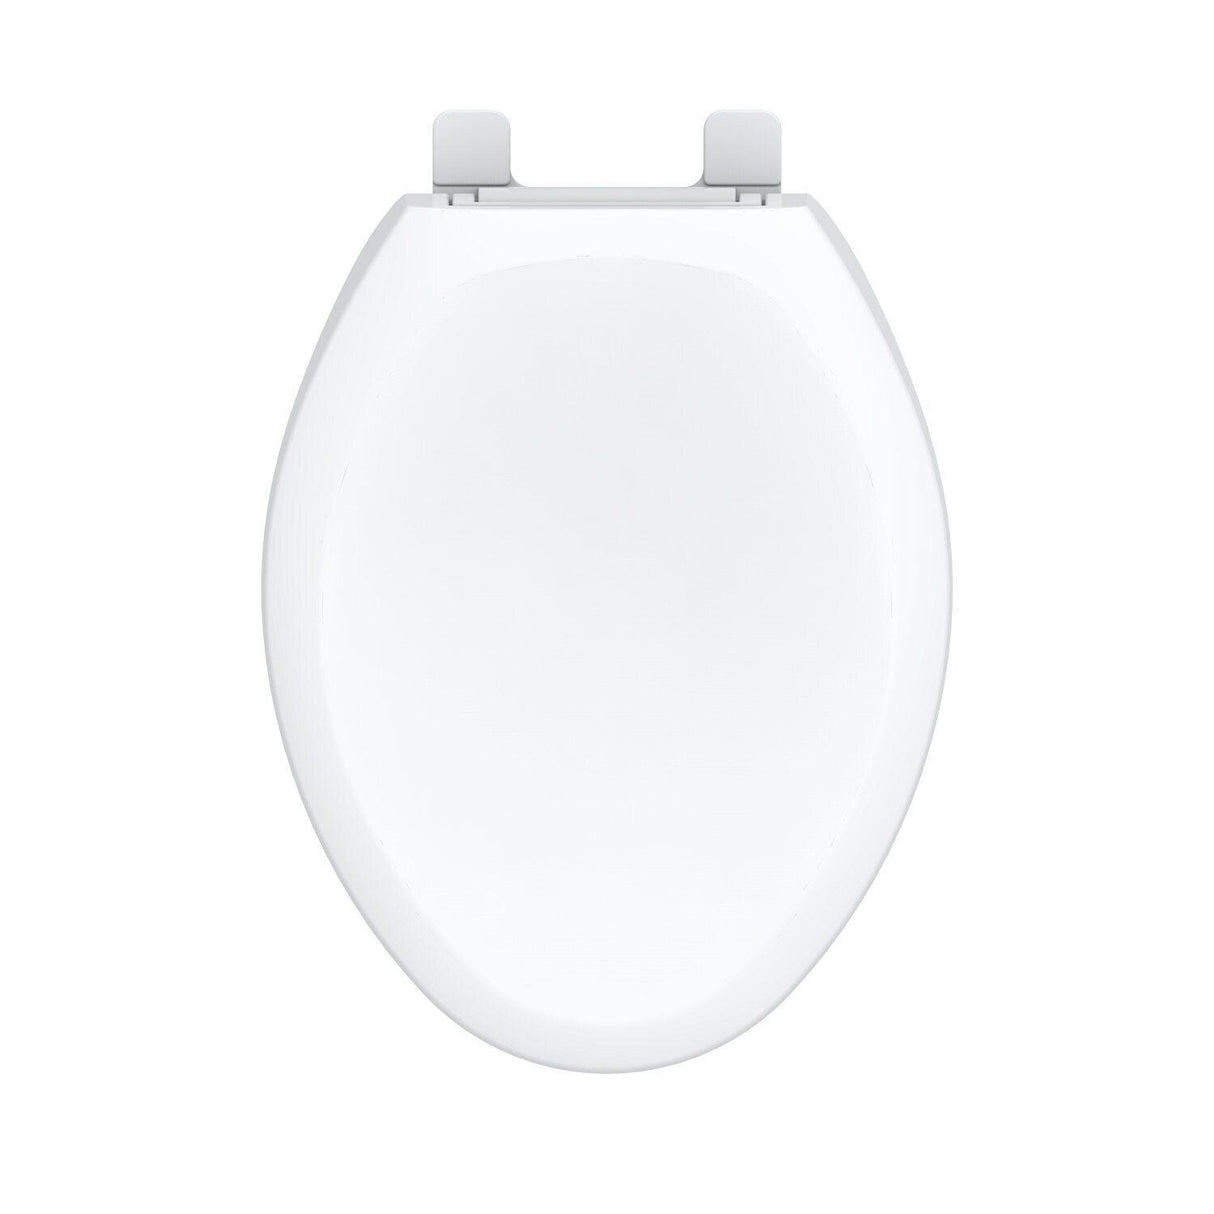 Gerber G009921609 Biscuit Adjustable Standard Elongated Toilet Seat With Cover